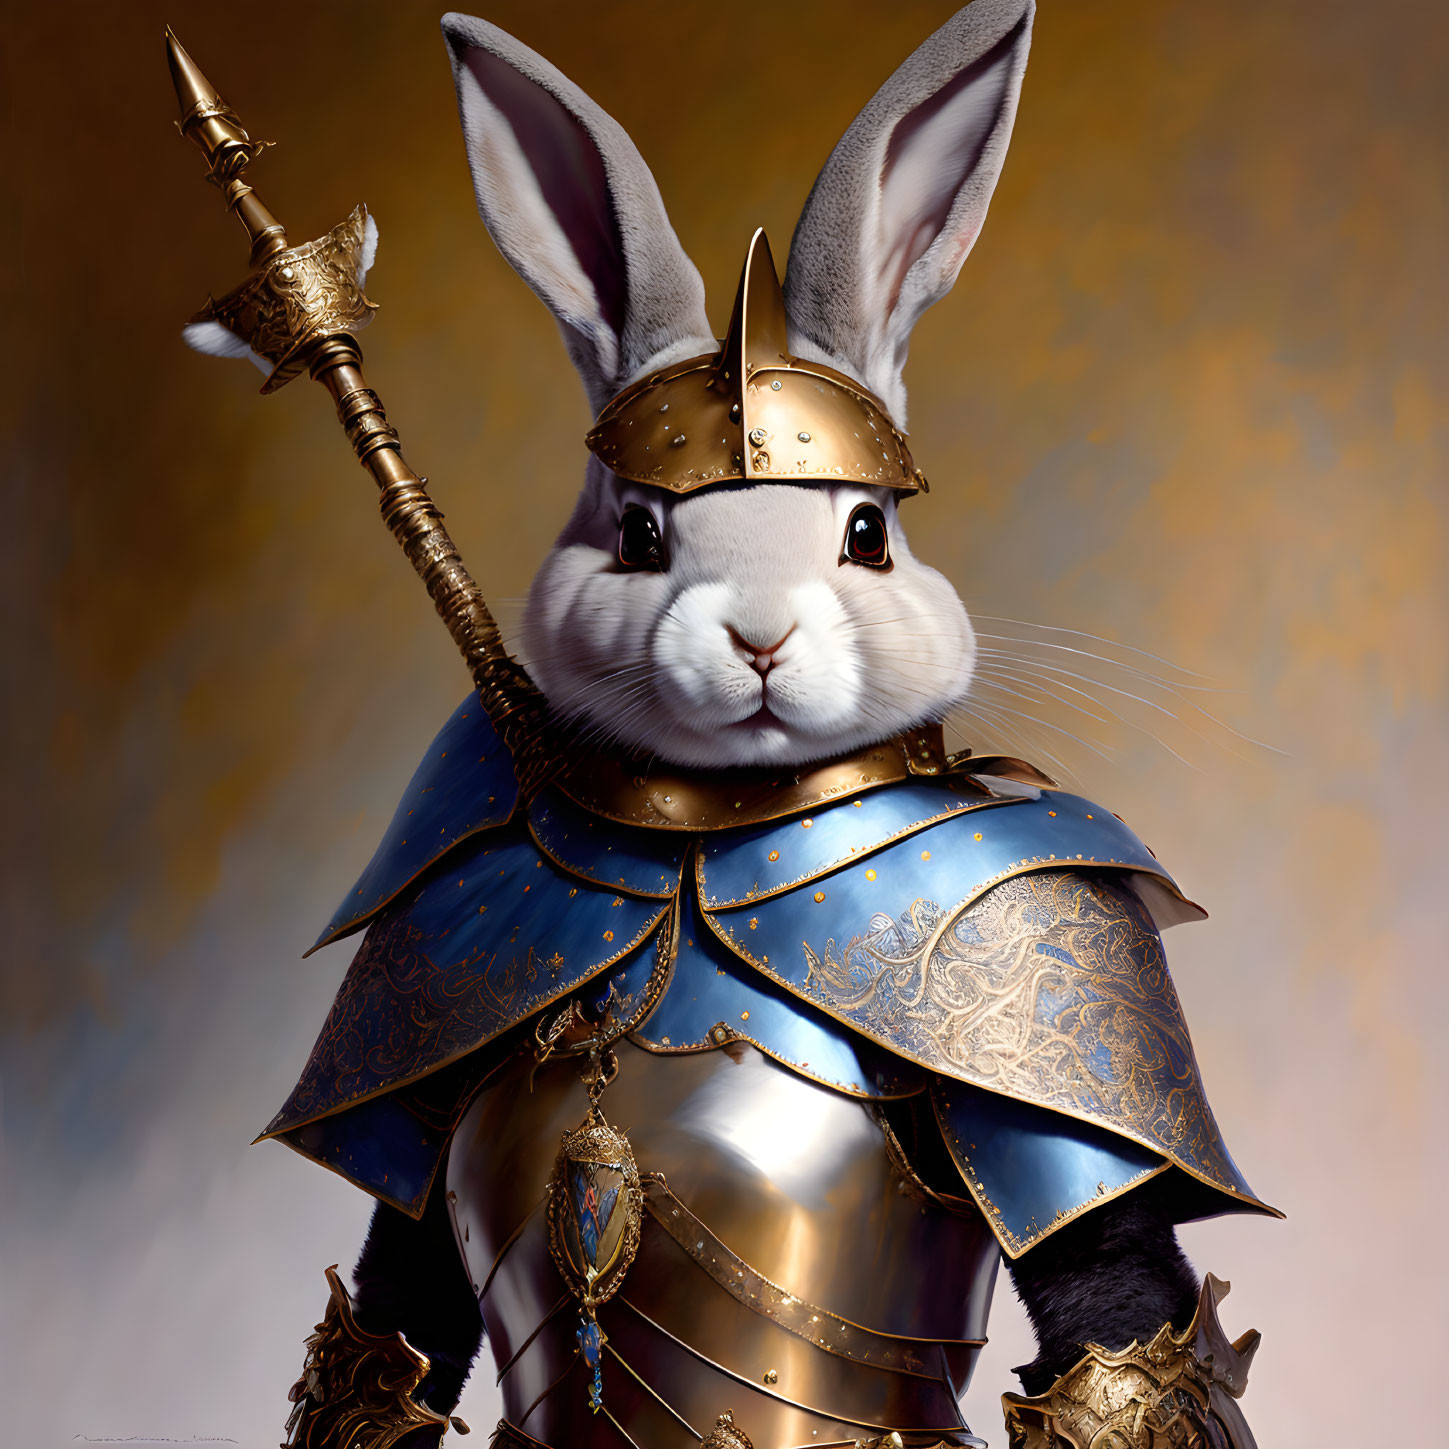 Anthropomorphic Rabbit in Medieval Armor with Spear on Golden-Brown Background